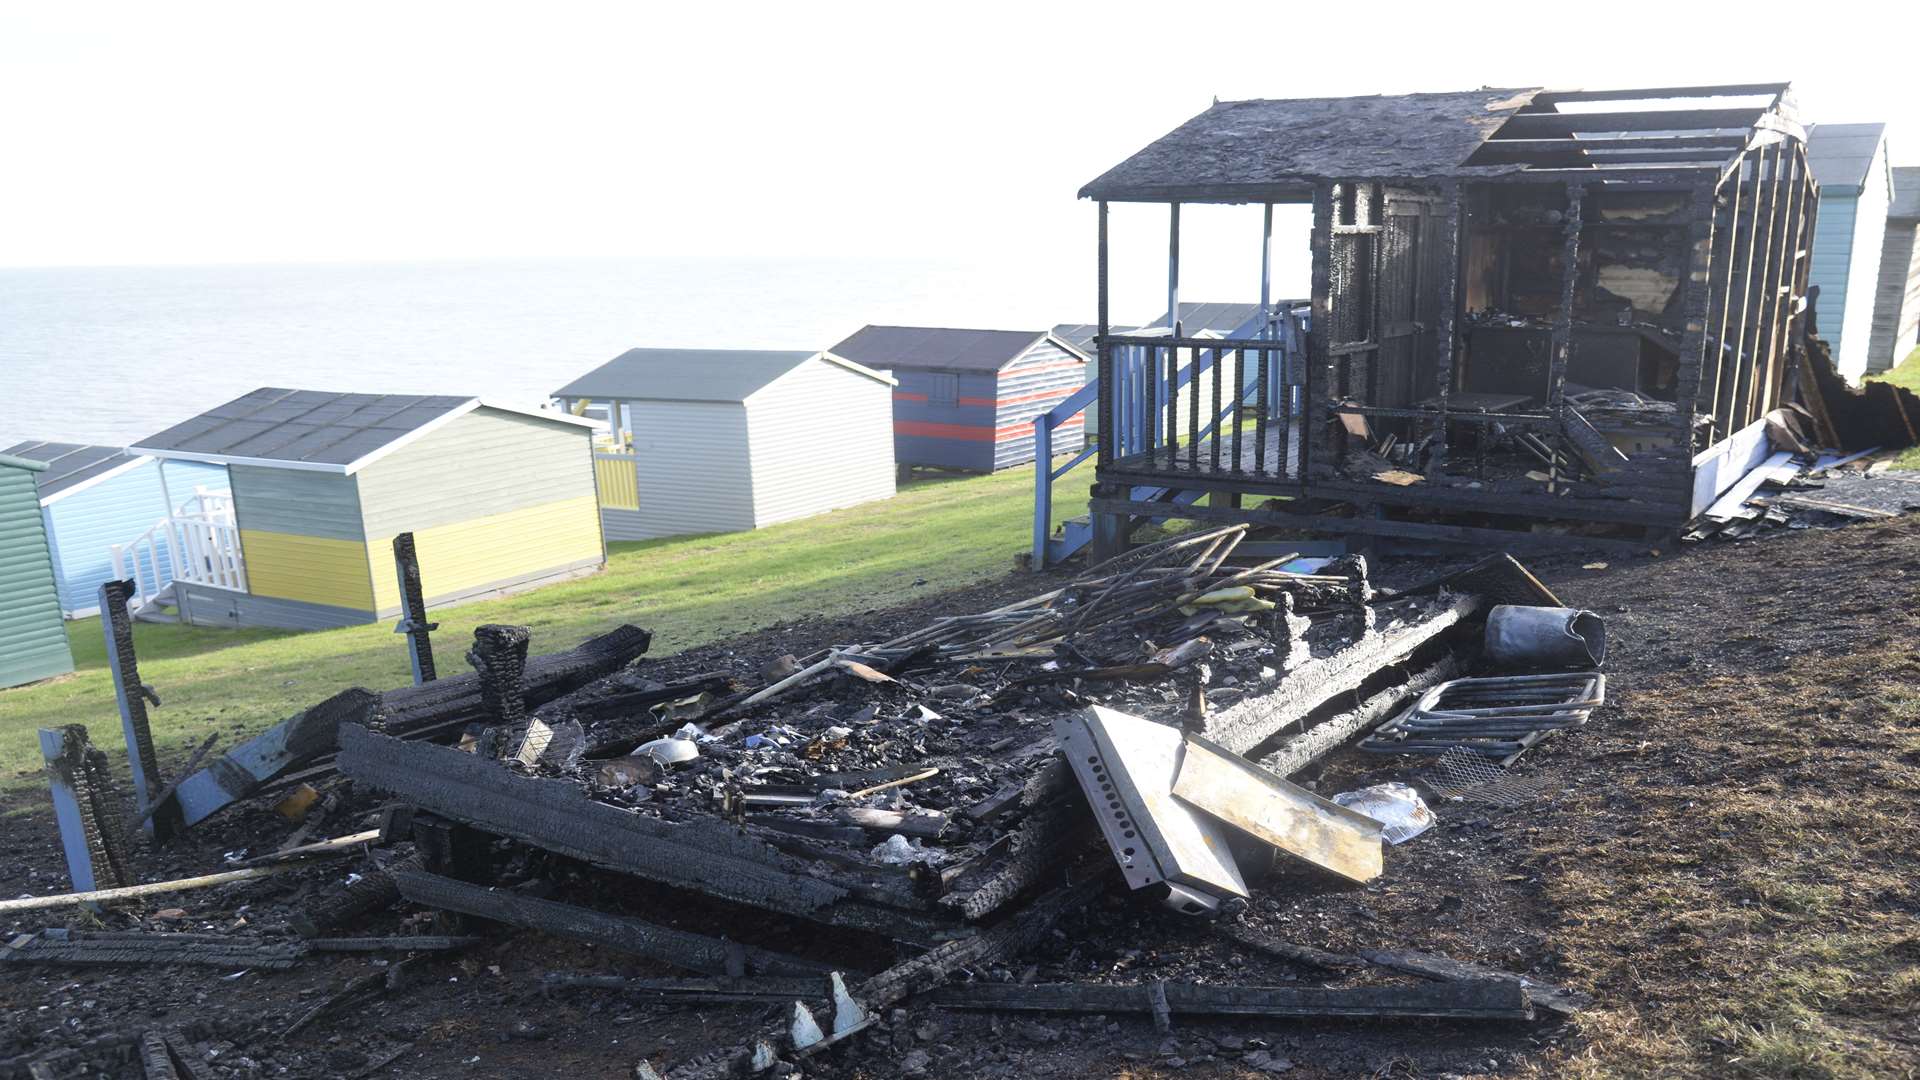 One of the burnt out beach huts on Tankerton slopes